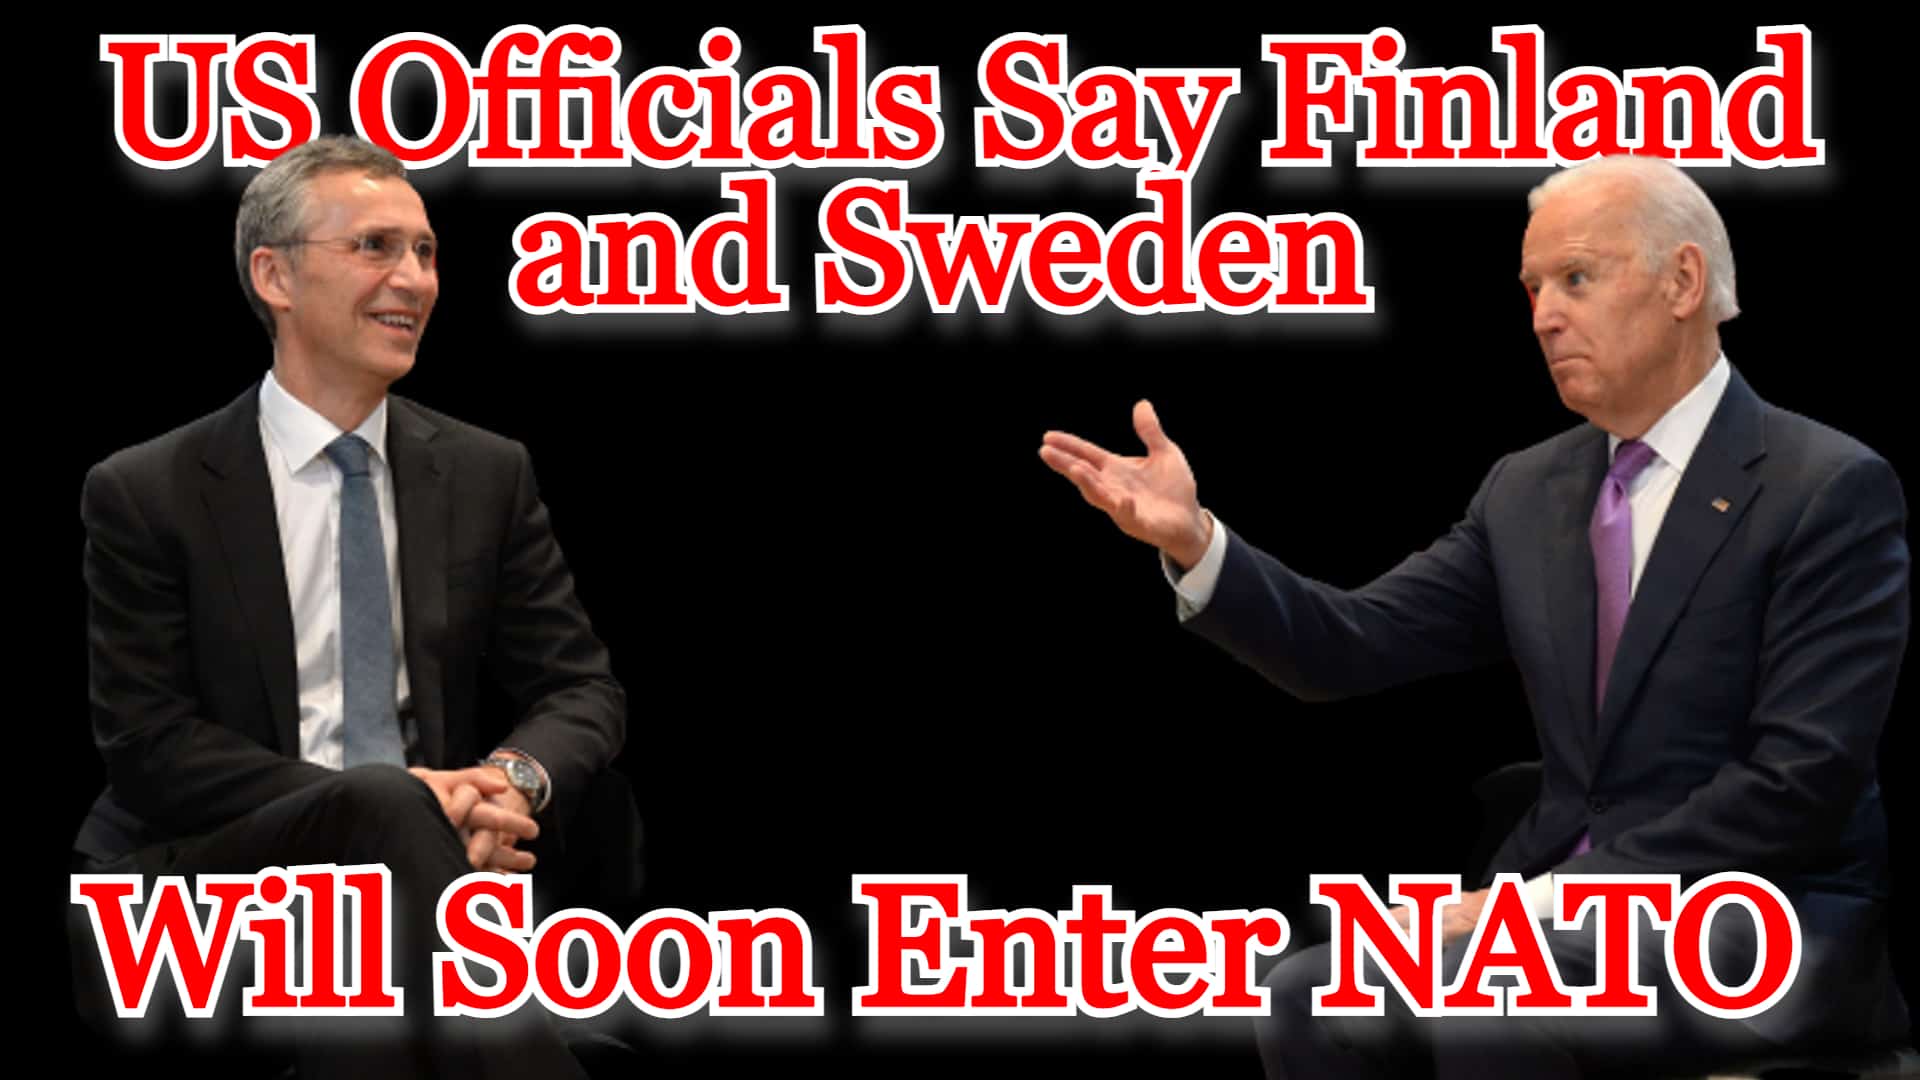 COI #261: US Officials Say Finland and Sweden Will Soon Enter NATO